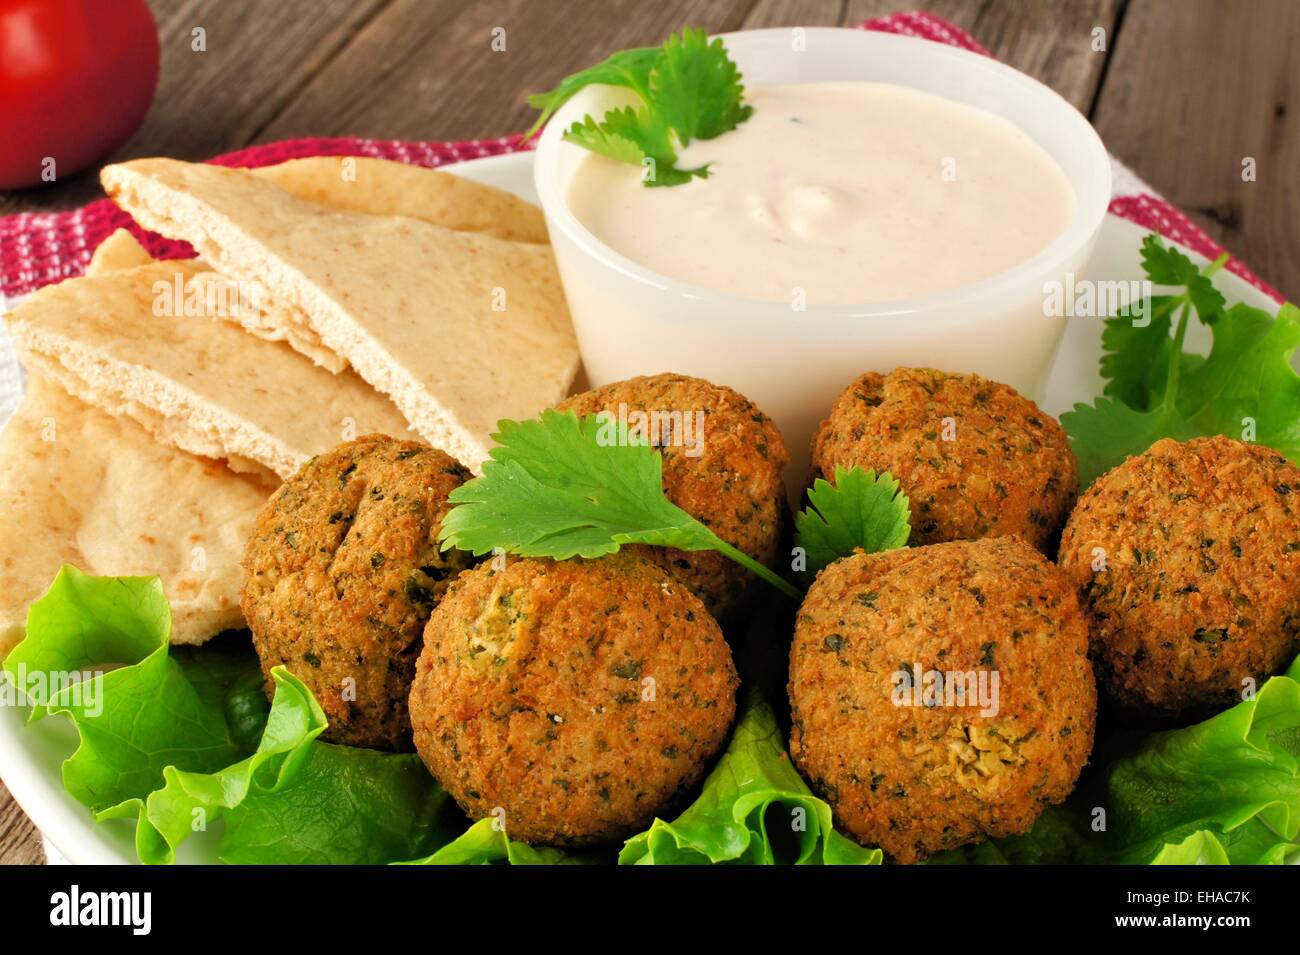 Falafel on lettuce with pita bread and tzatziki sauce close-up Stock Photo